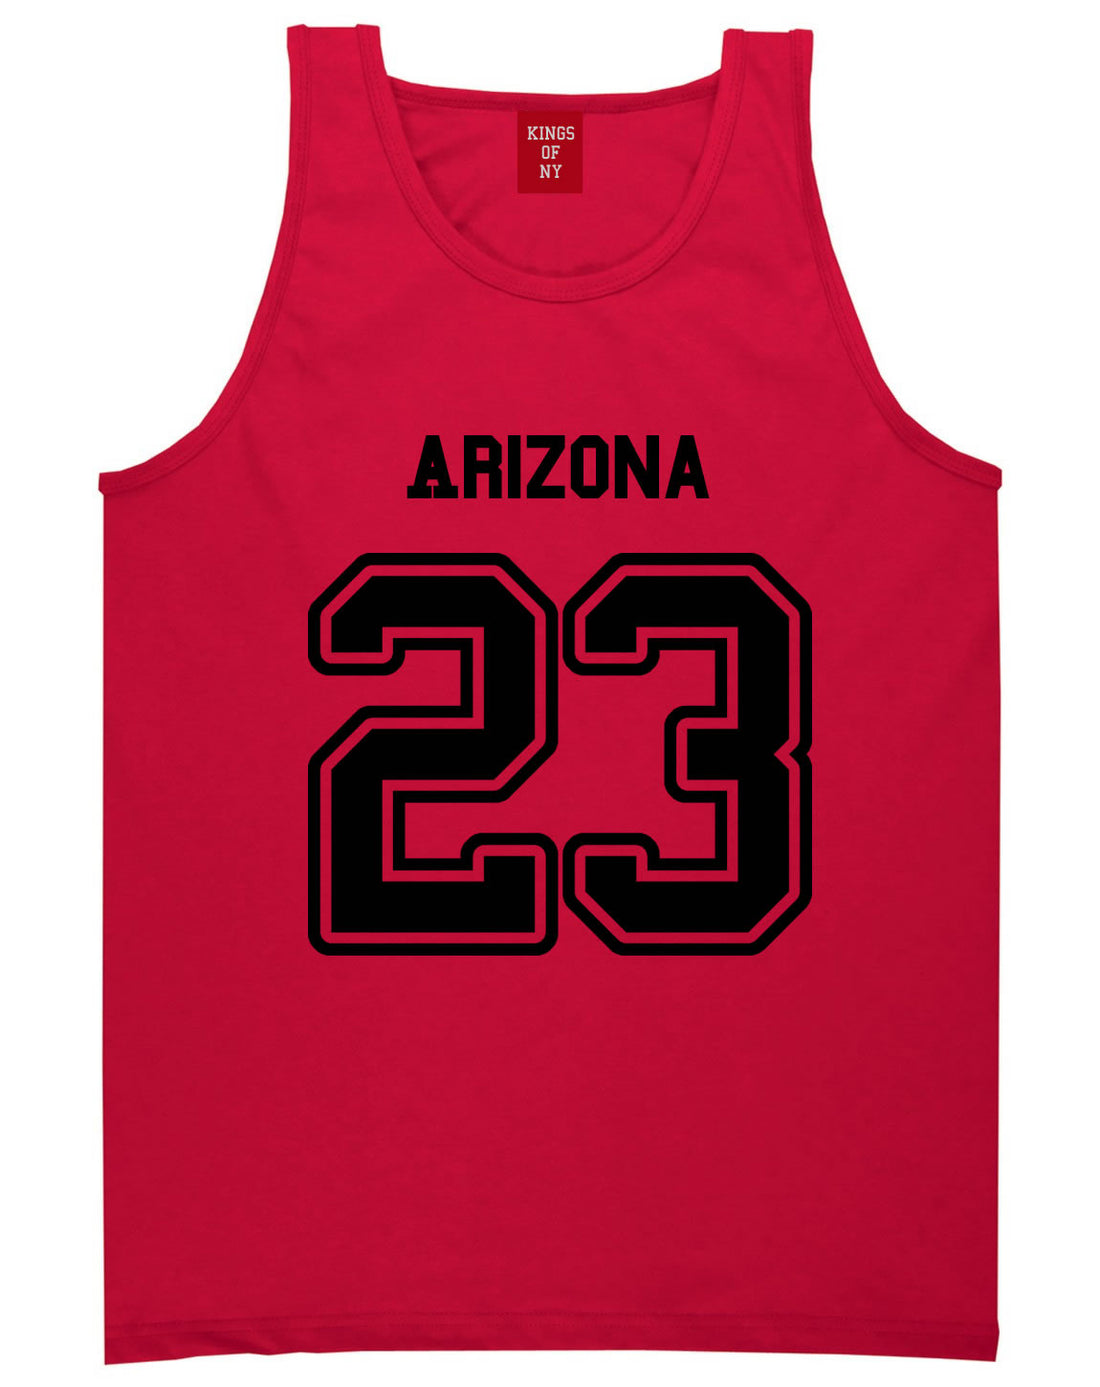 Sport Style Arizona 23 Team State Jersey Mens Tank Top By Kings Of NY